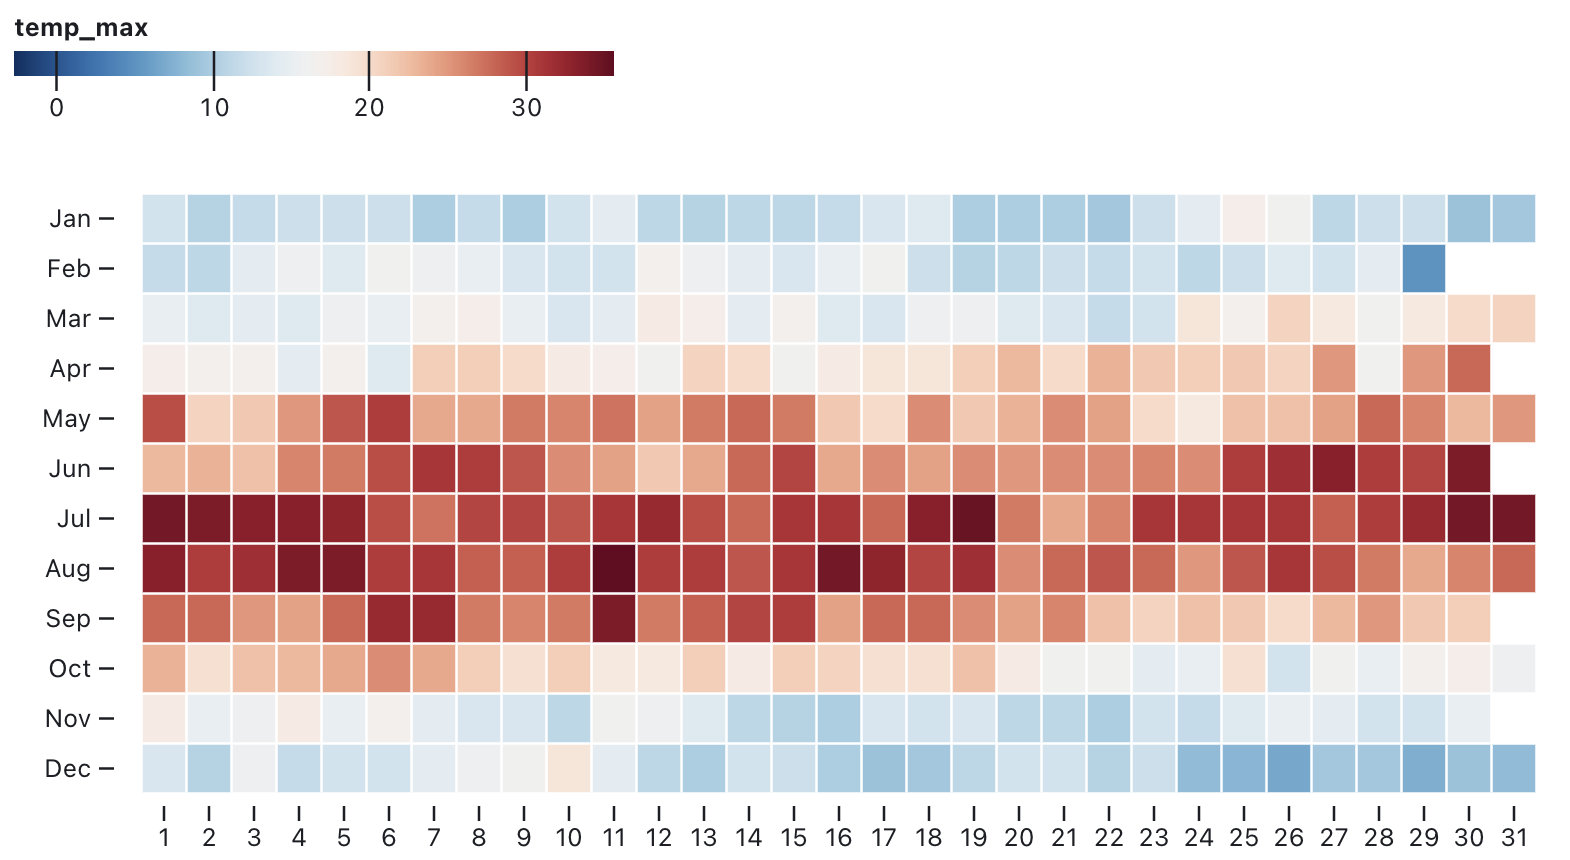 A heatmap with a gradient colour scale for maximum daily temperatures over the course of a year